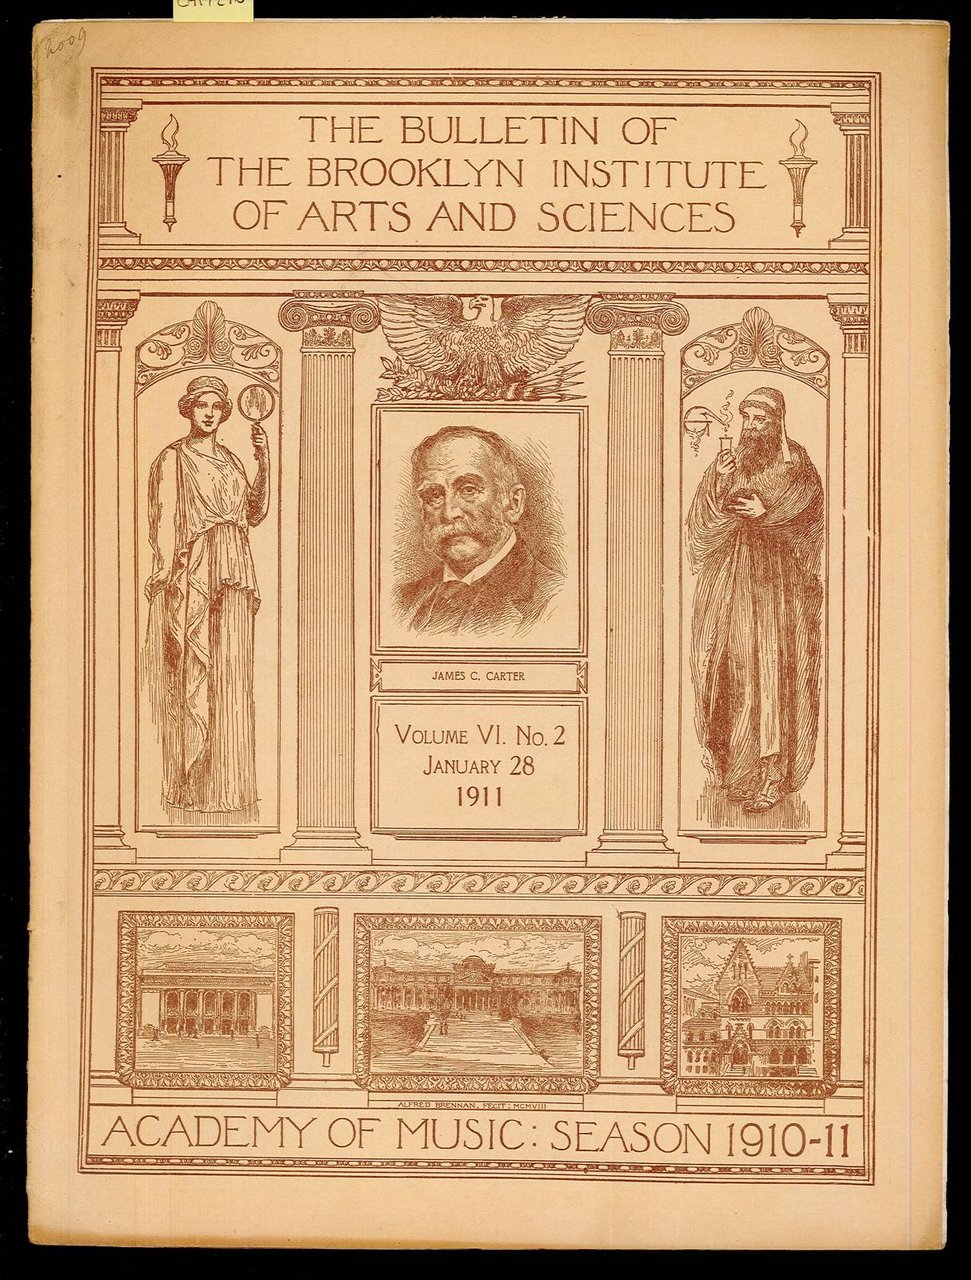 The bulletin of the Brooklyn Institute of Arts and Sciences